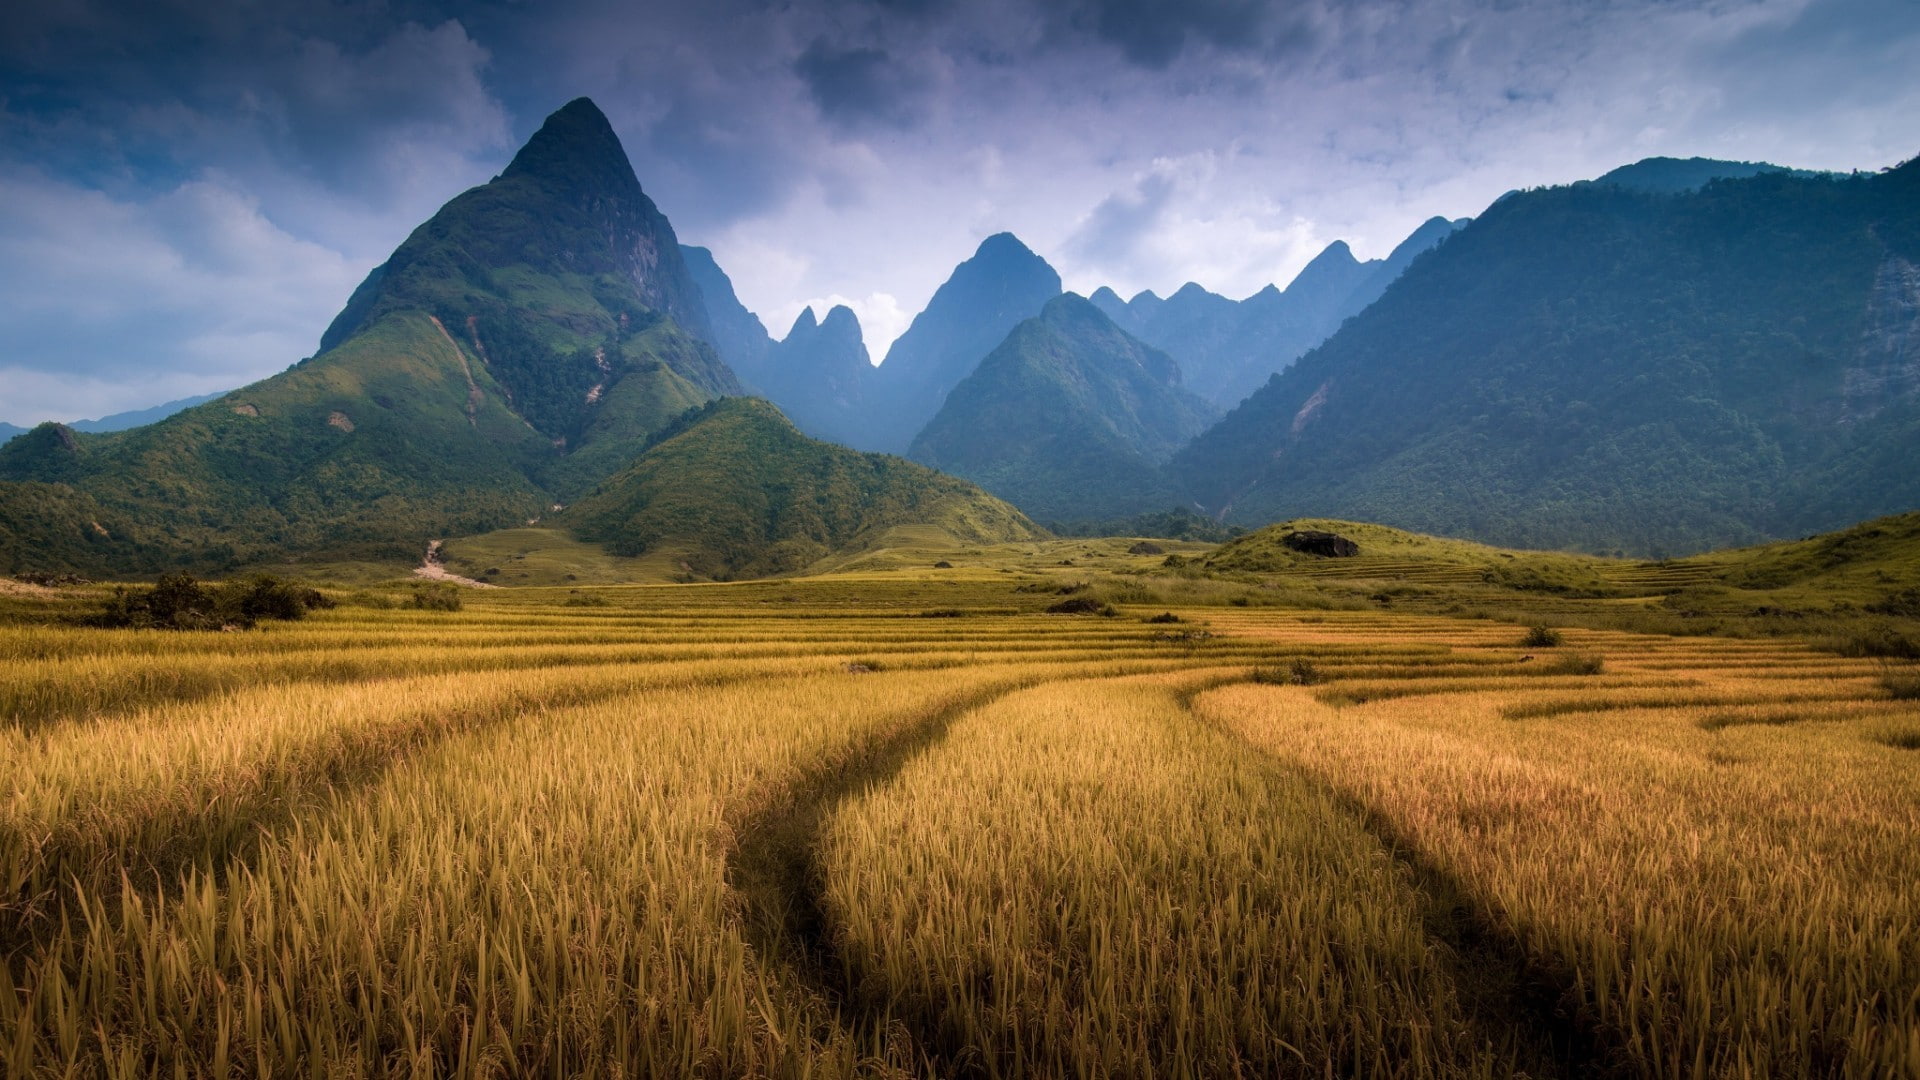 Nature, Landscape, Mountain, Clouds, Vietnam, Field, Trees, Forest, Spikelets, Hill